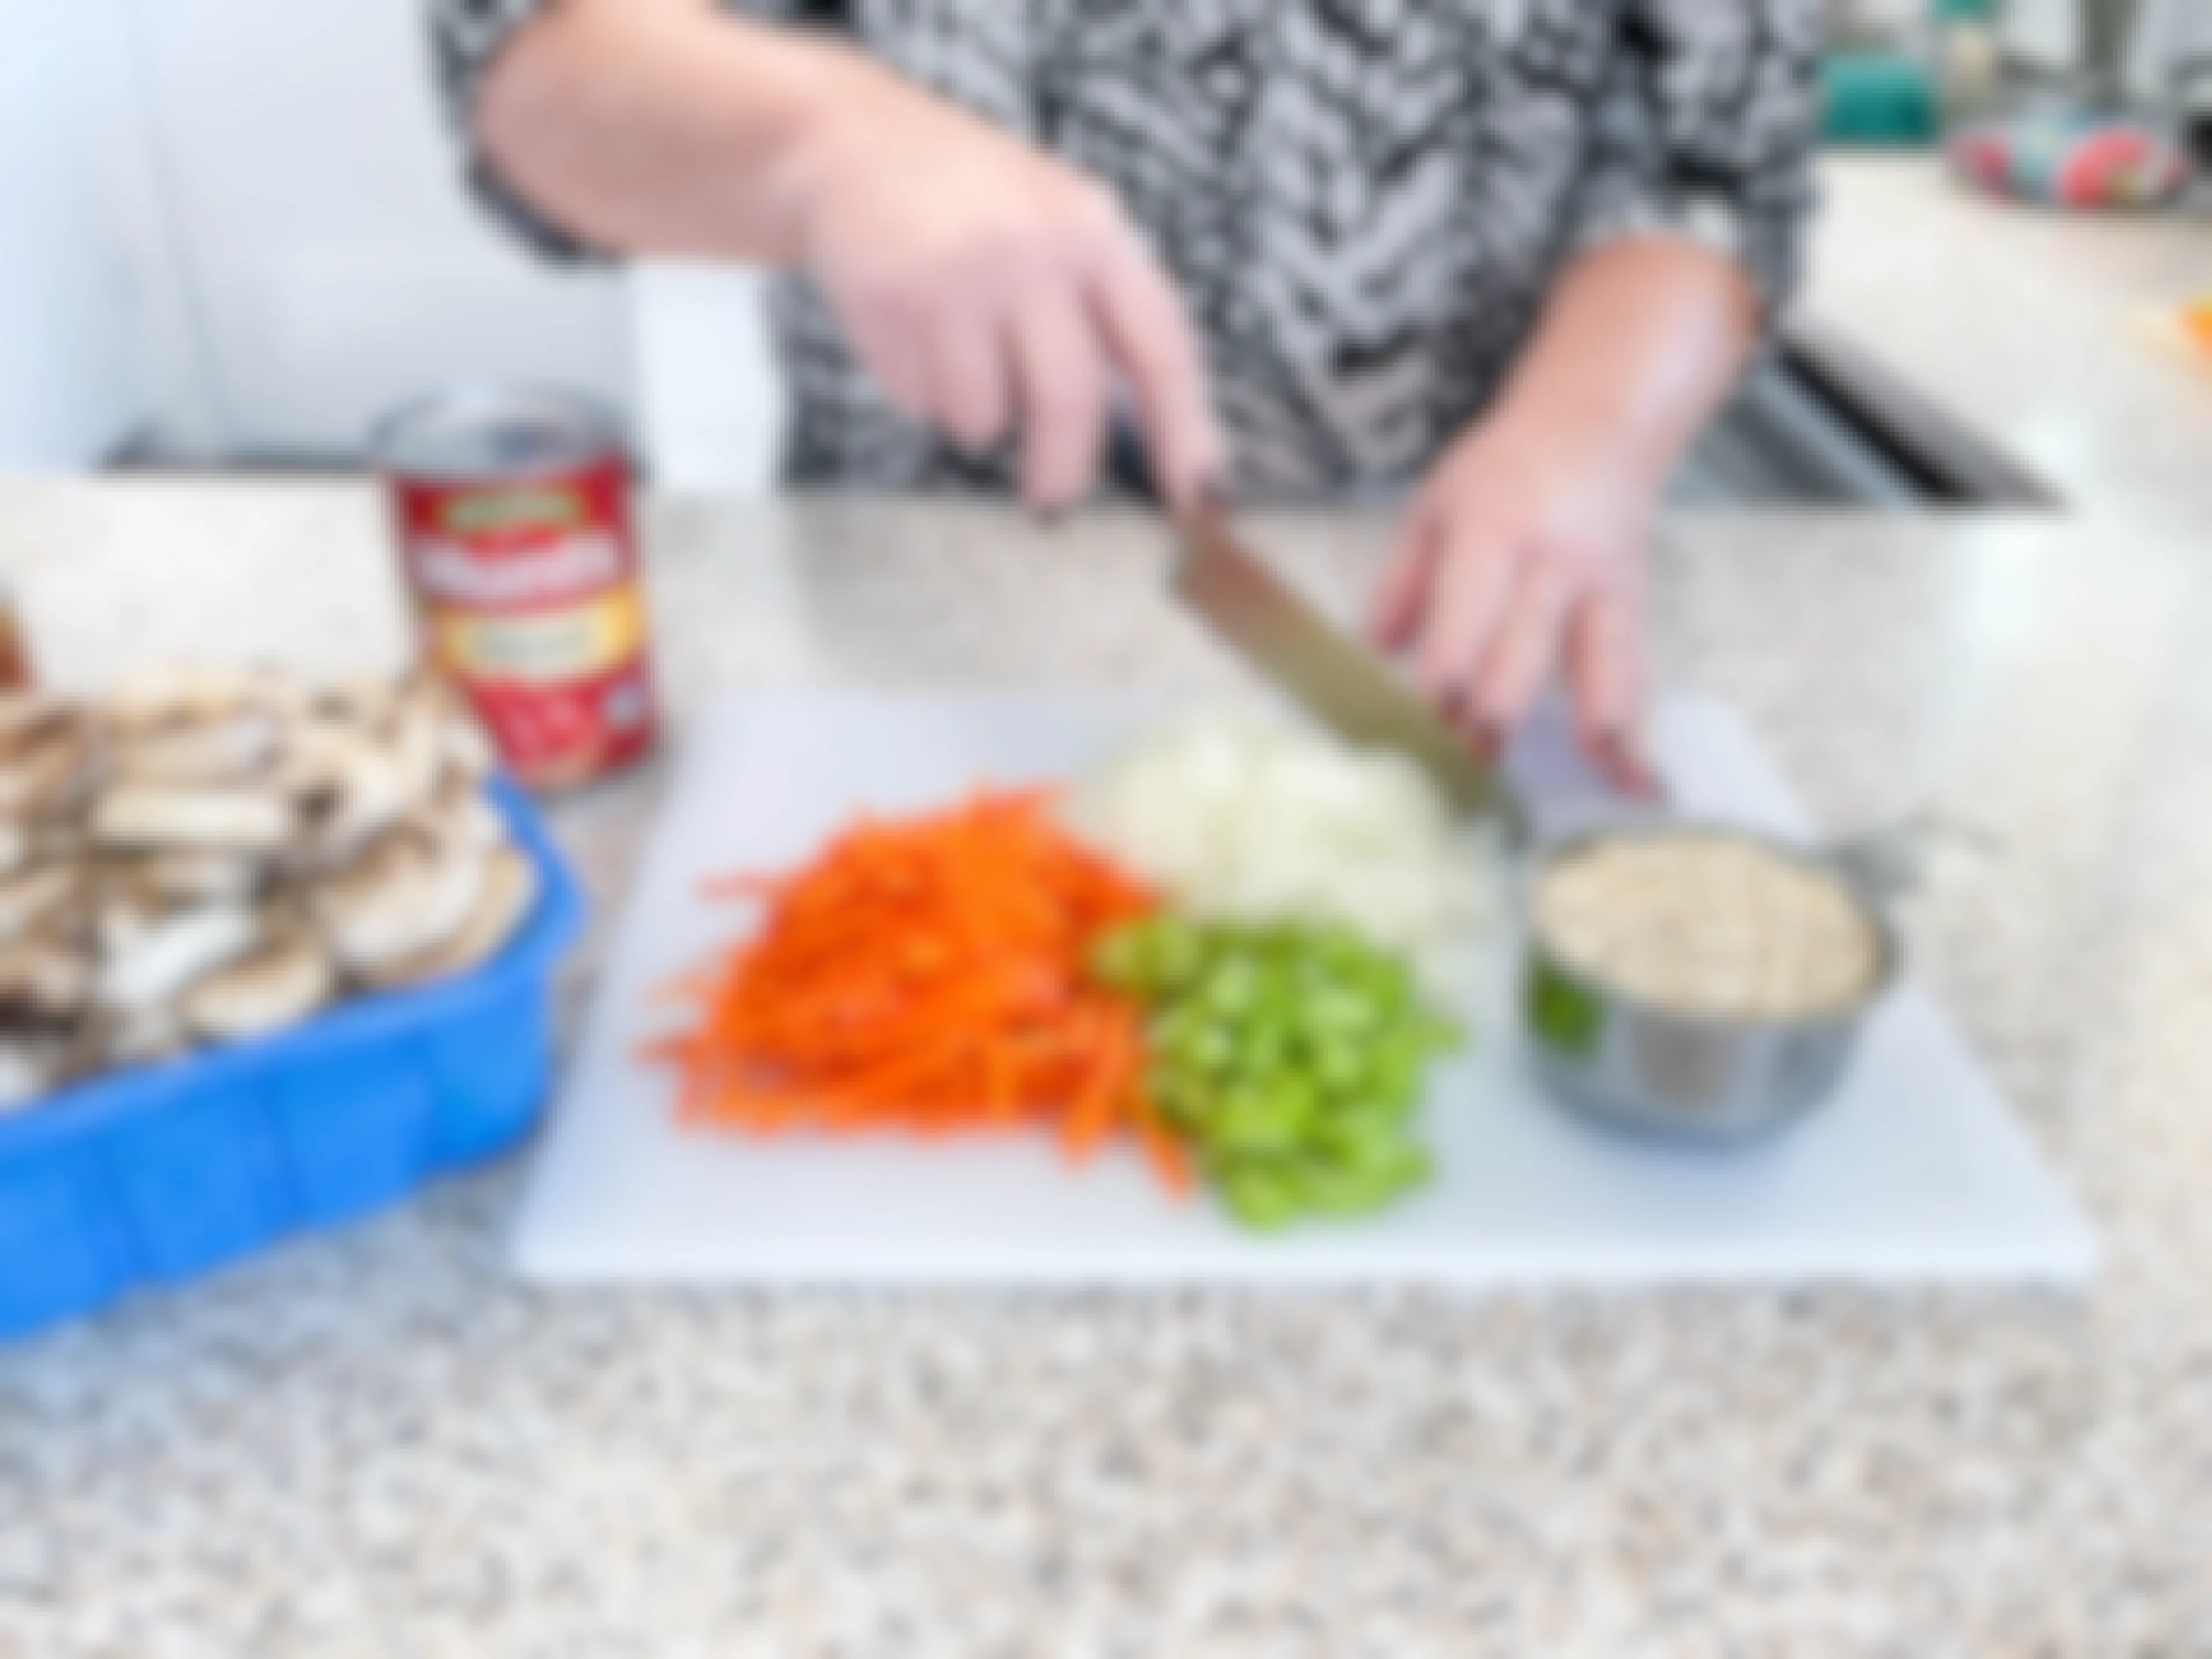 A woman preparing ingredients, chopping vegetables on a cutting board.